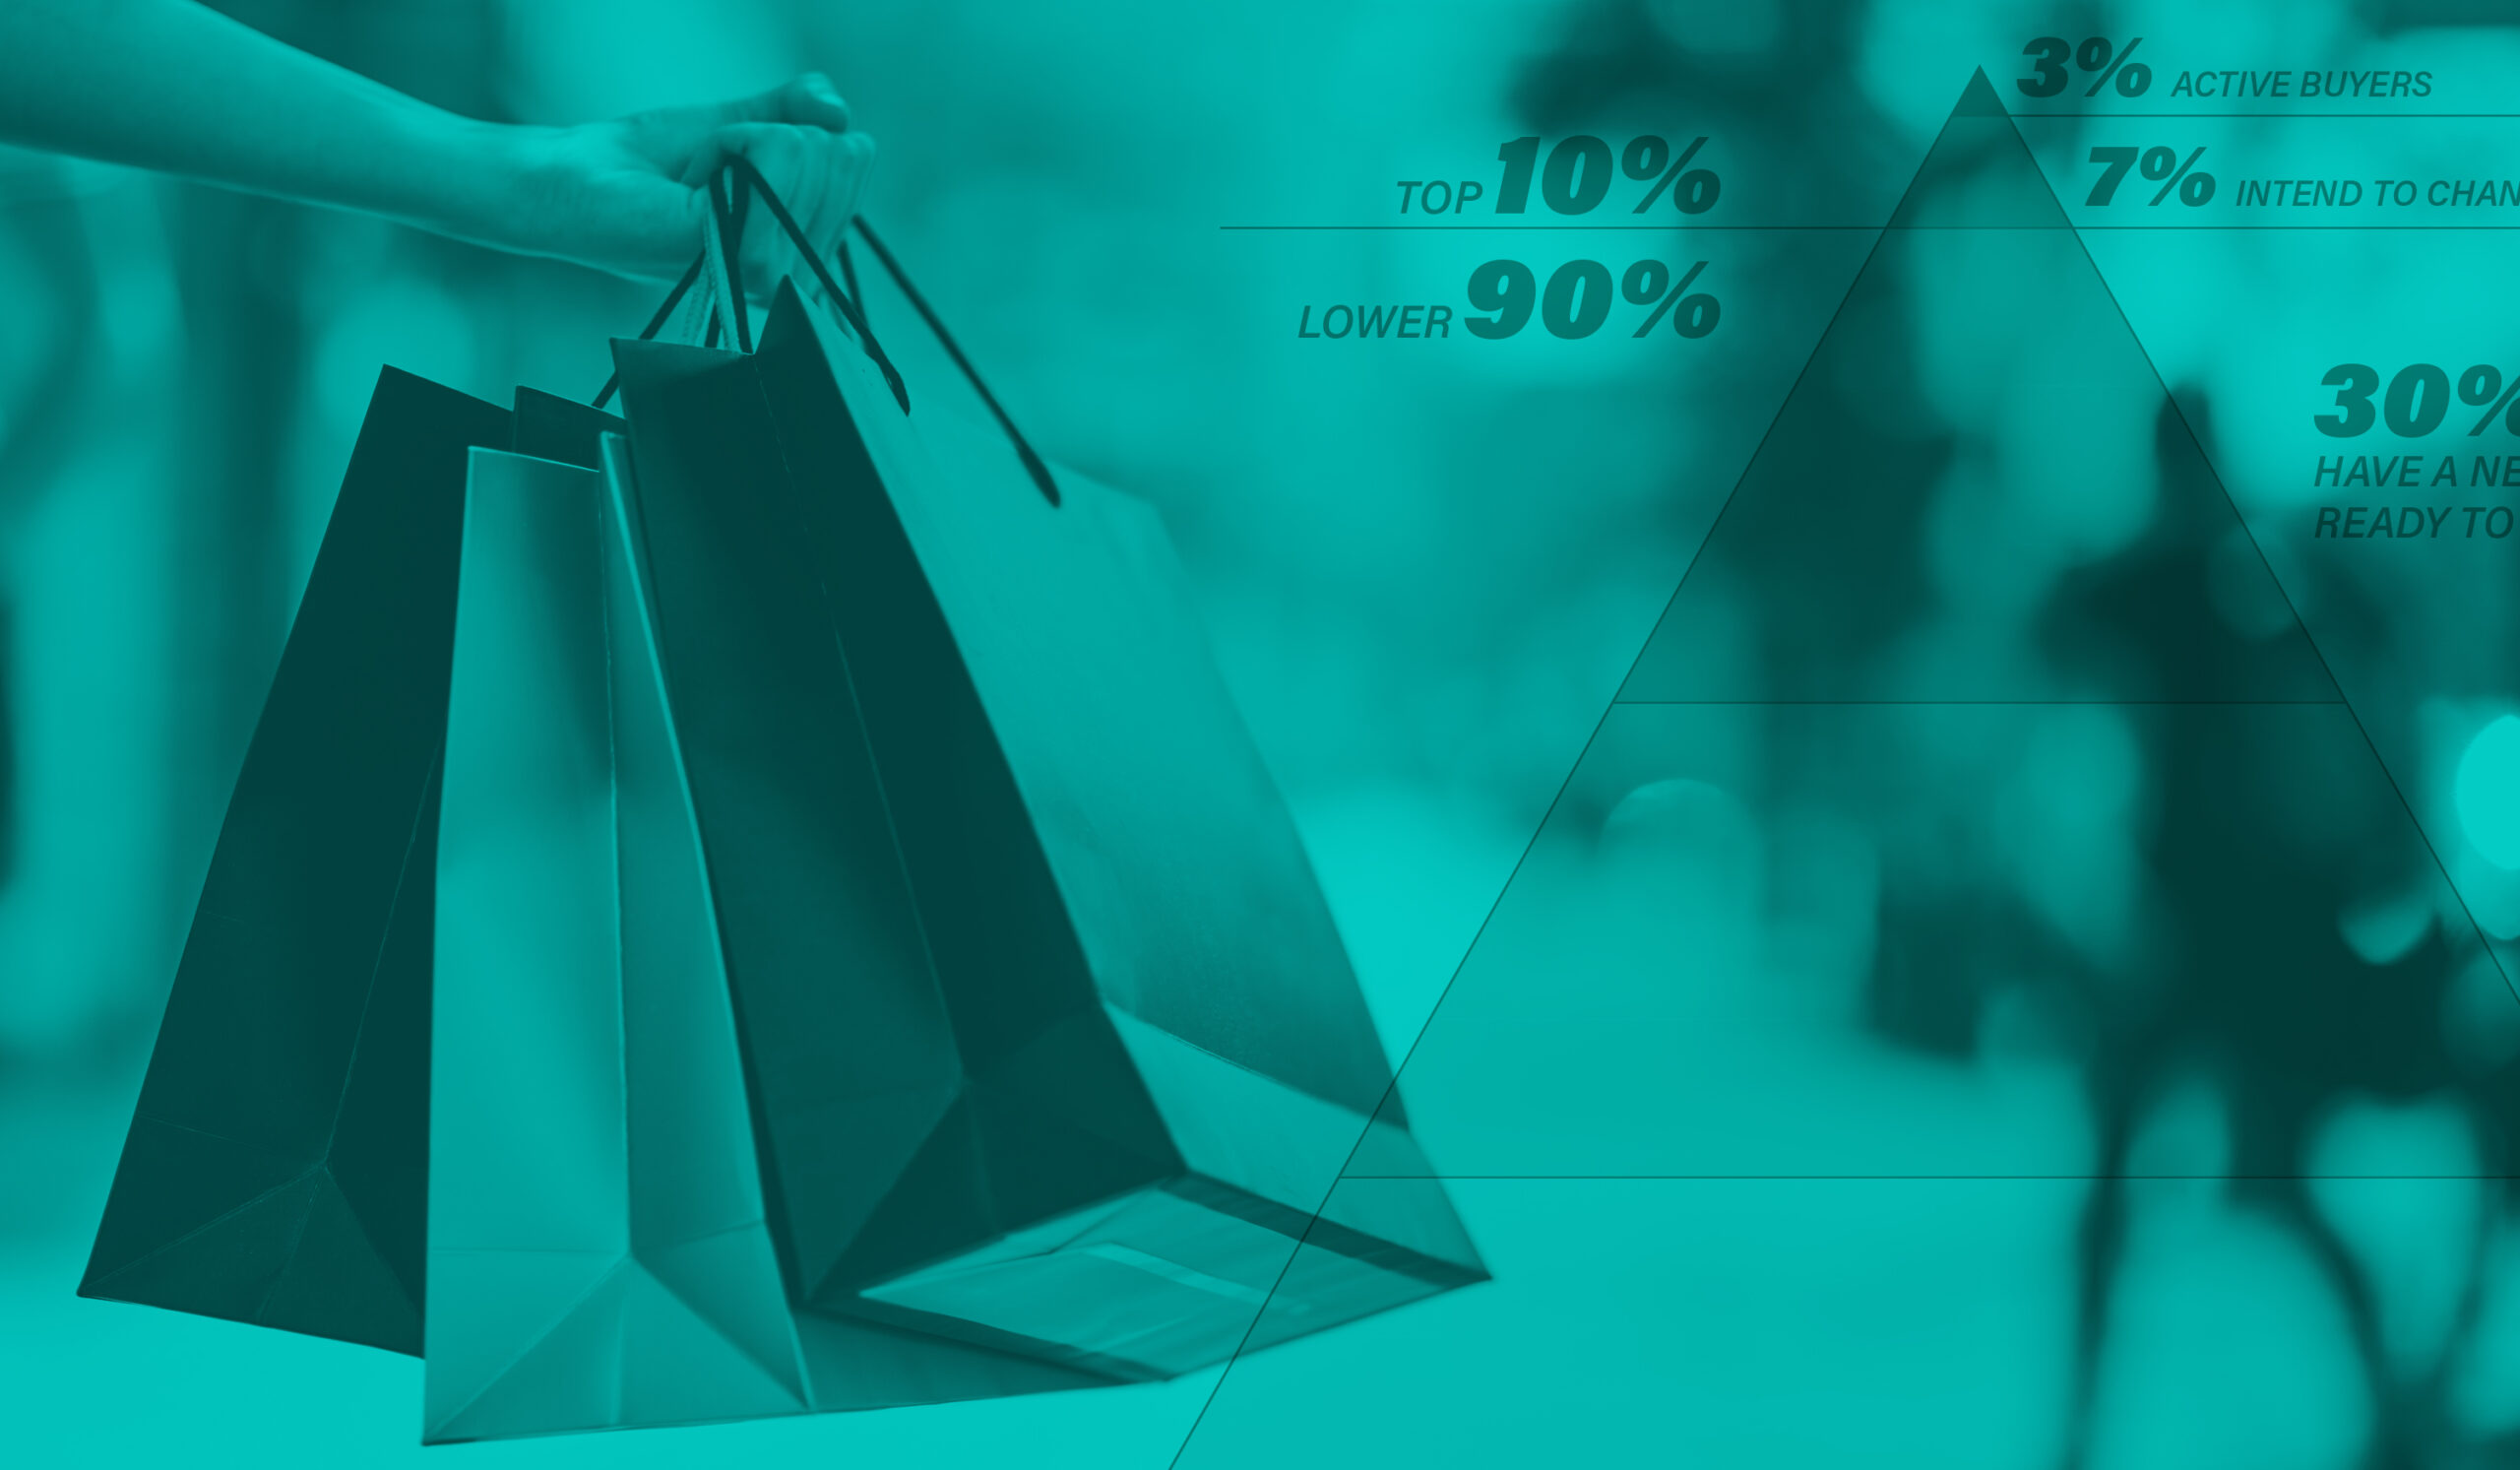 Blog feature imaged consisting of a person holding shopping bags on the left side and the right side features an image of the Buyer Pyramid superimposed on top of shoppers in the distance